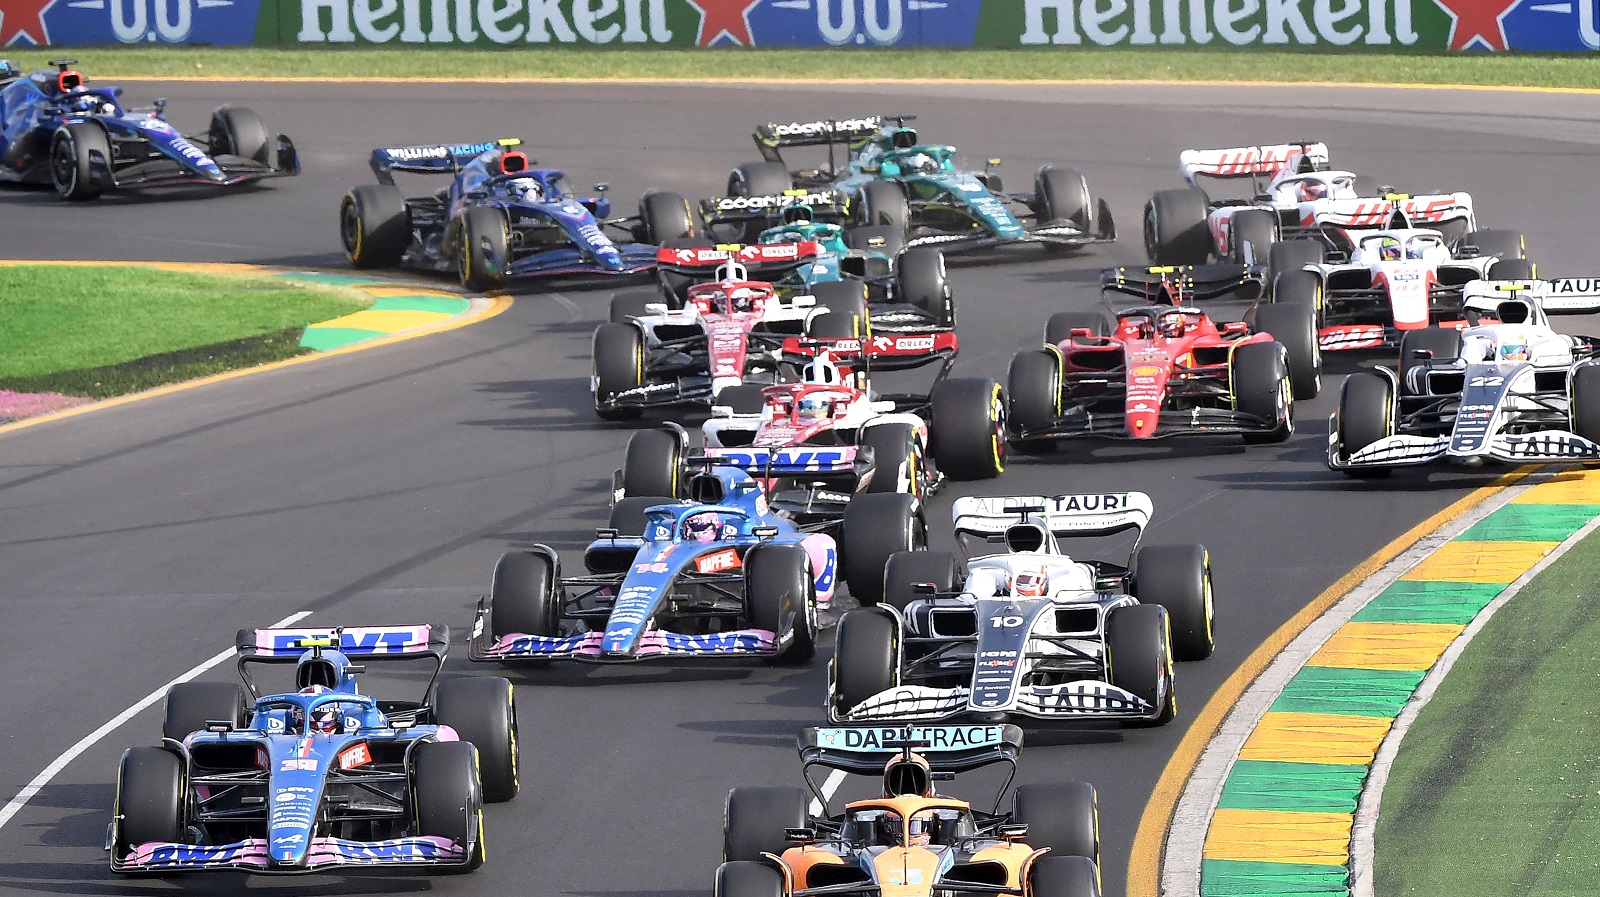 Formula 1 cars negotiate a corner at the start of the 2022 Australian Grand Prix at the Albert Park Circuit in Melbourne on April 10, 2022.